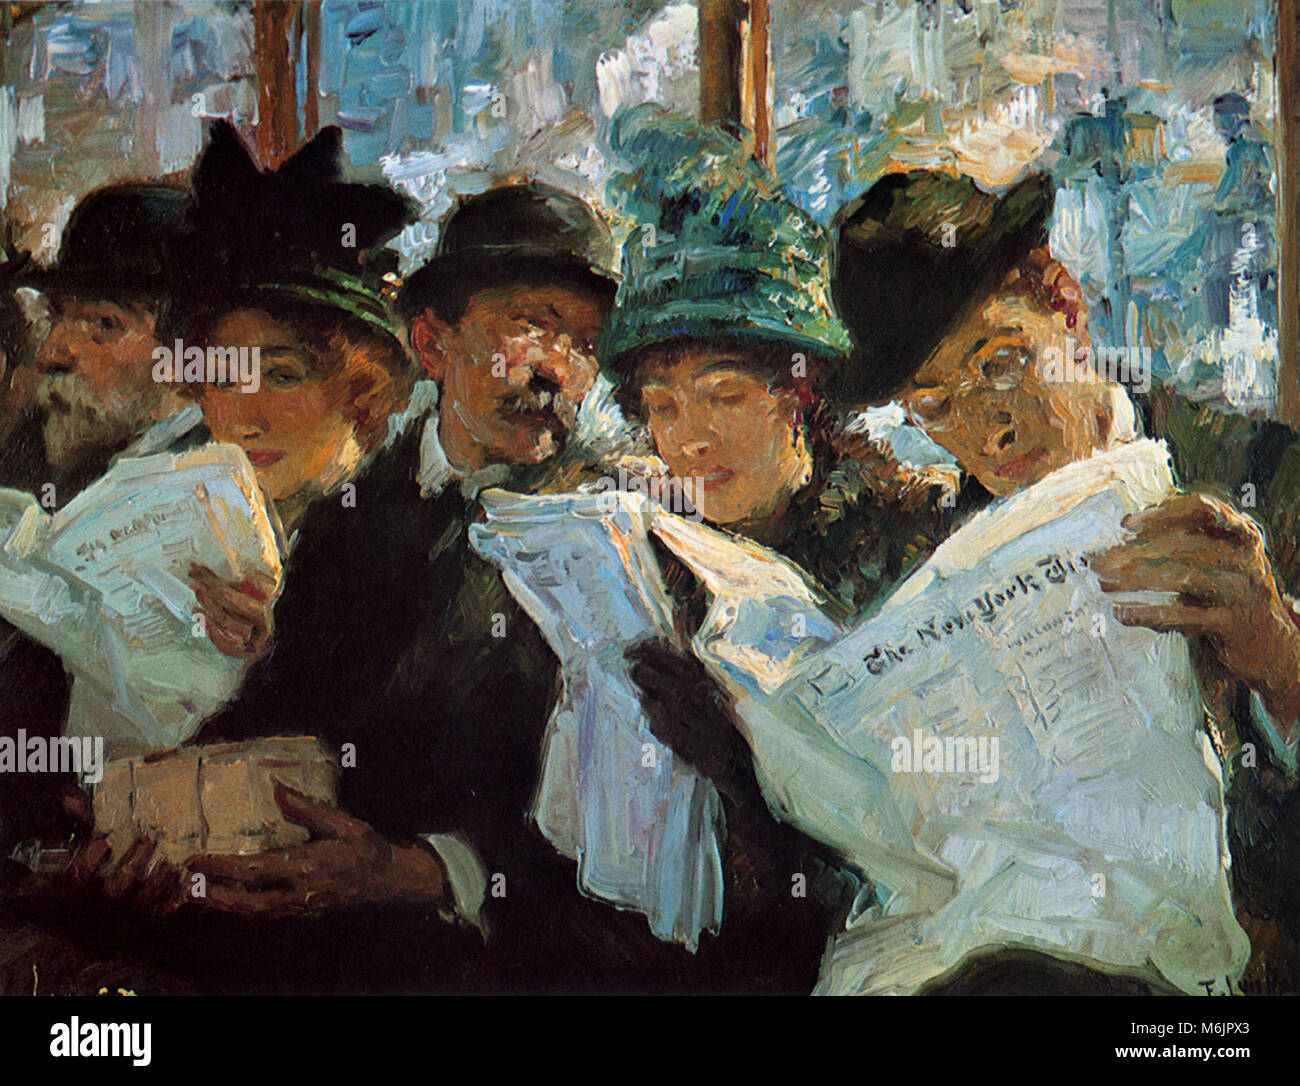 Morning News, Mora, Francis Luis, 1912. Banque D'Images